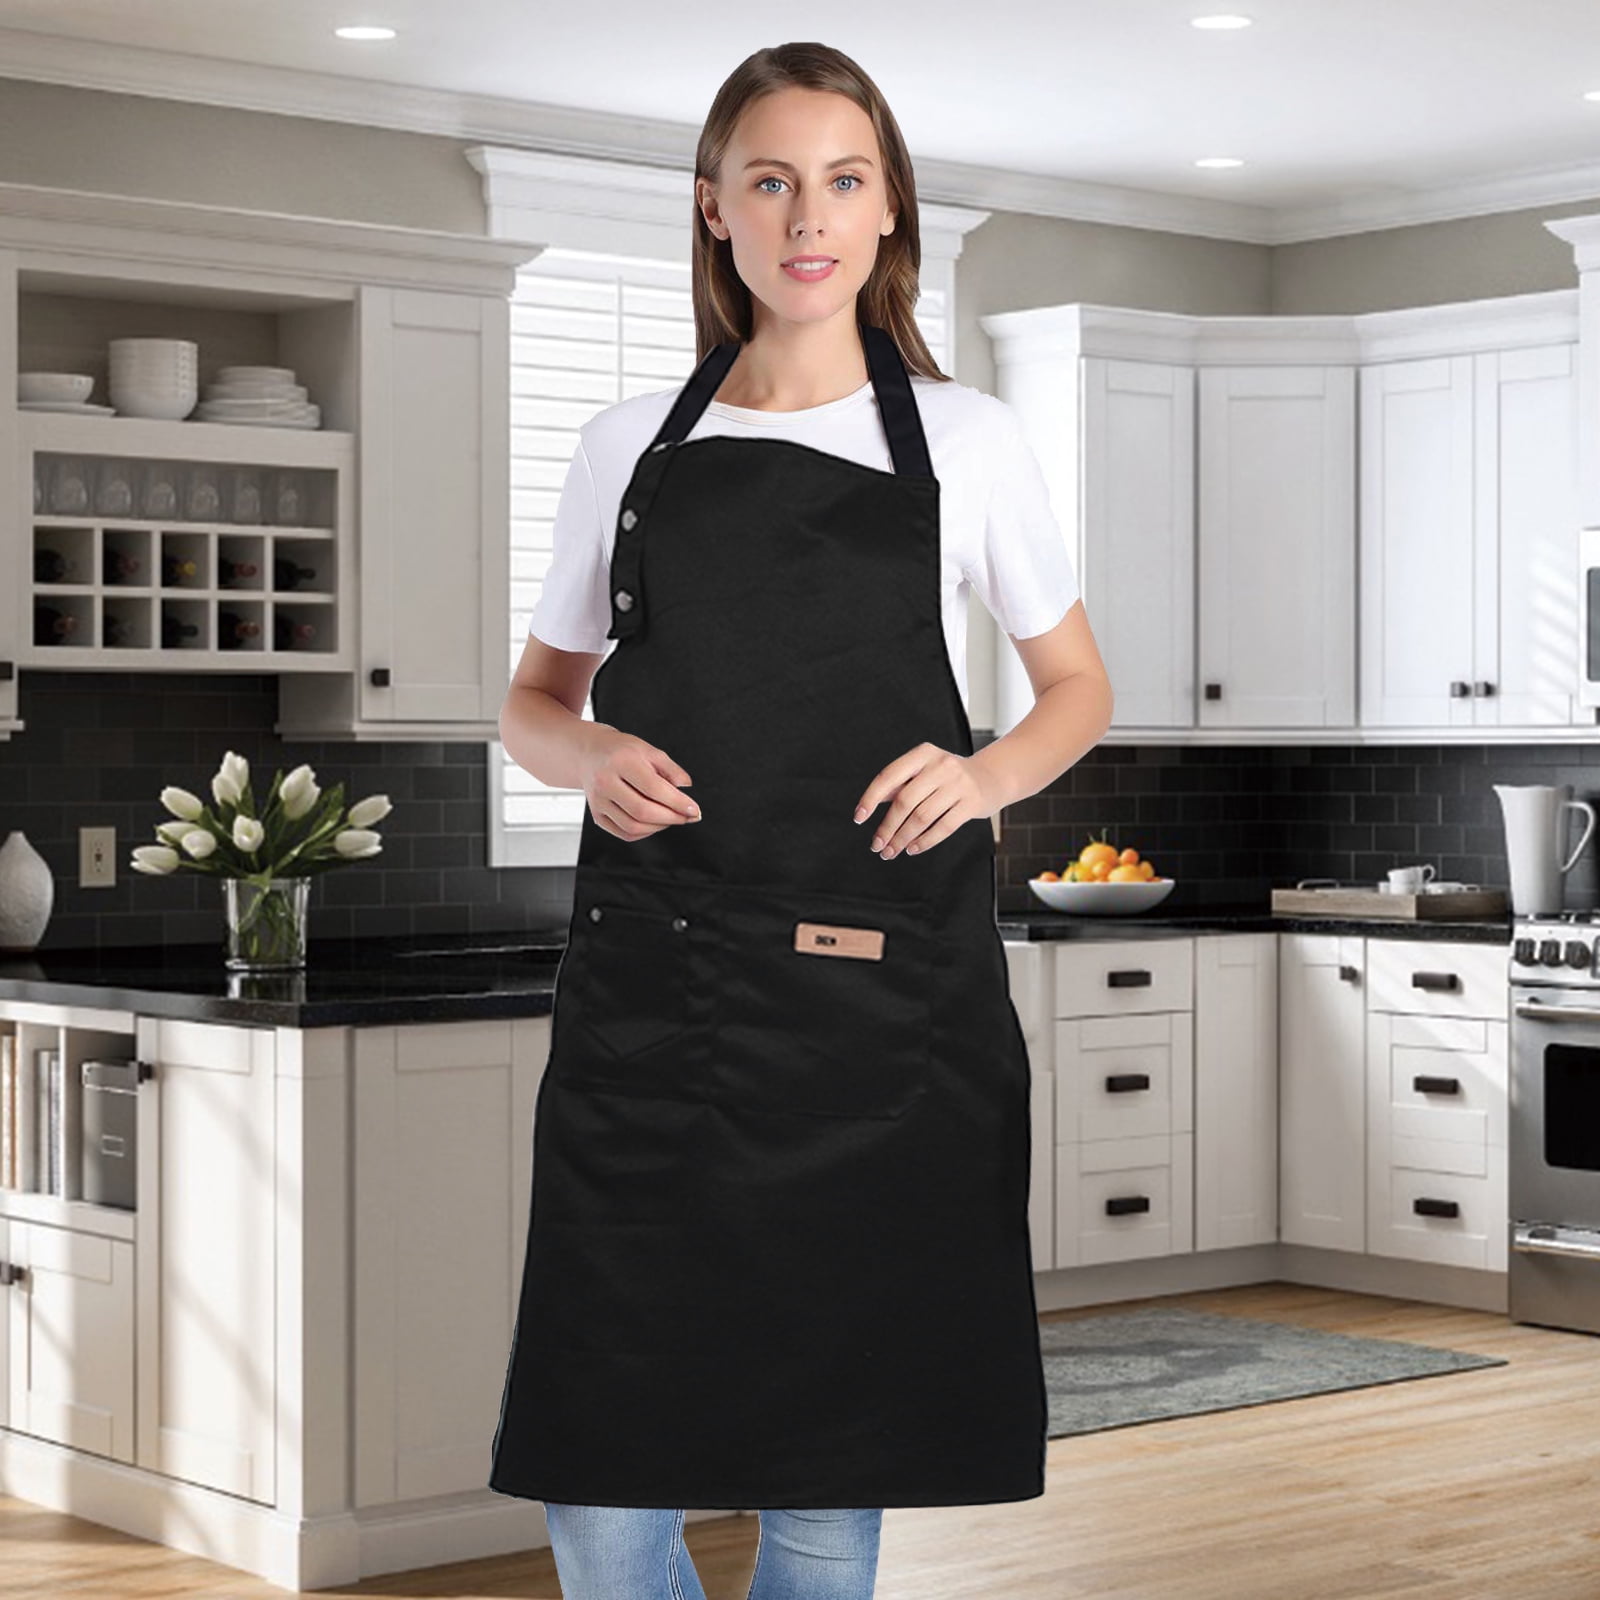 Clearance 2 Pack Apron Bib Waterproof for Cooking Painting Gardening Cleaning 